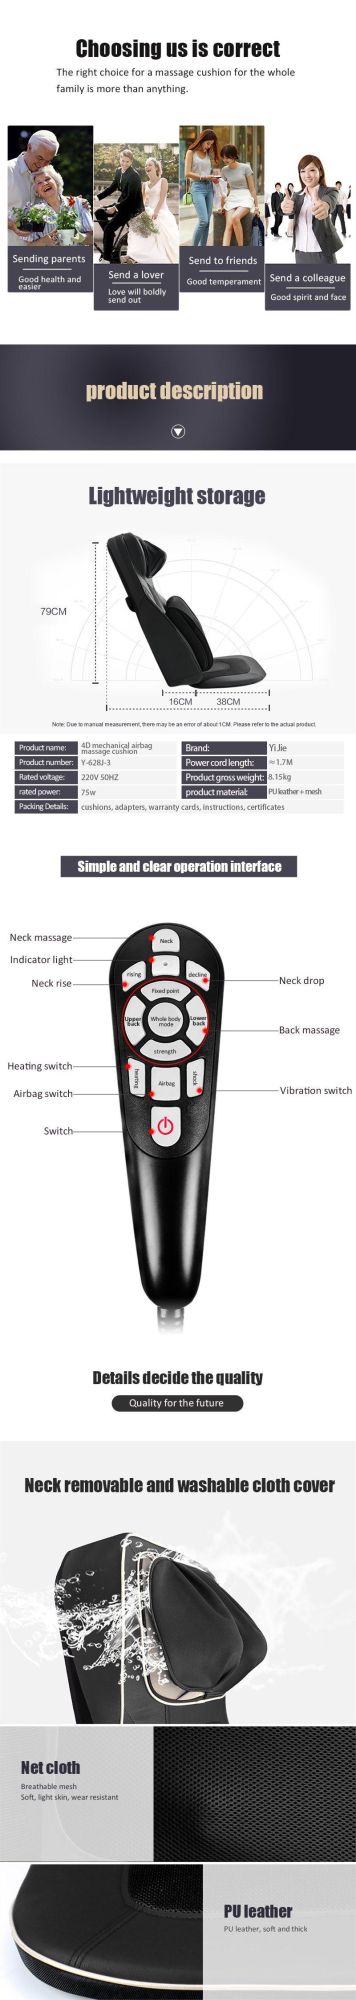 Back Smart Car Home Dual-Use Car with Kneading Vibrating and Heat for Full Body Massage Cushion